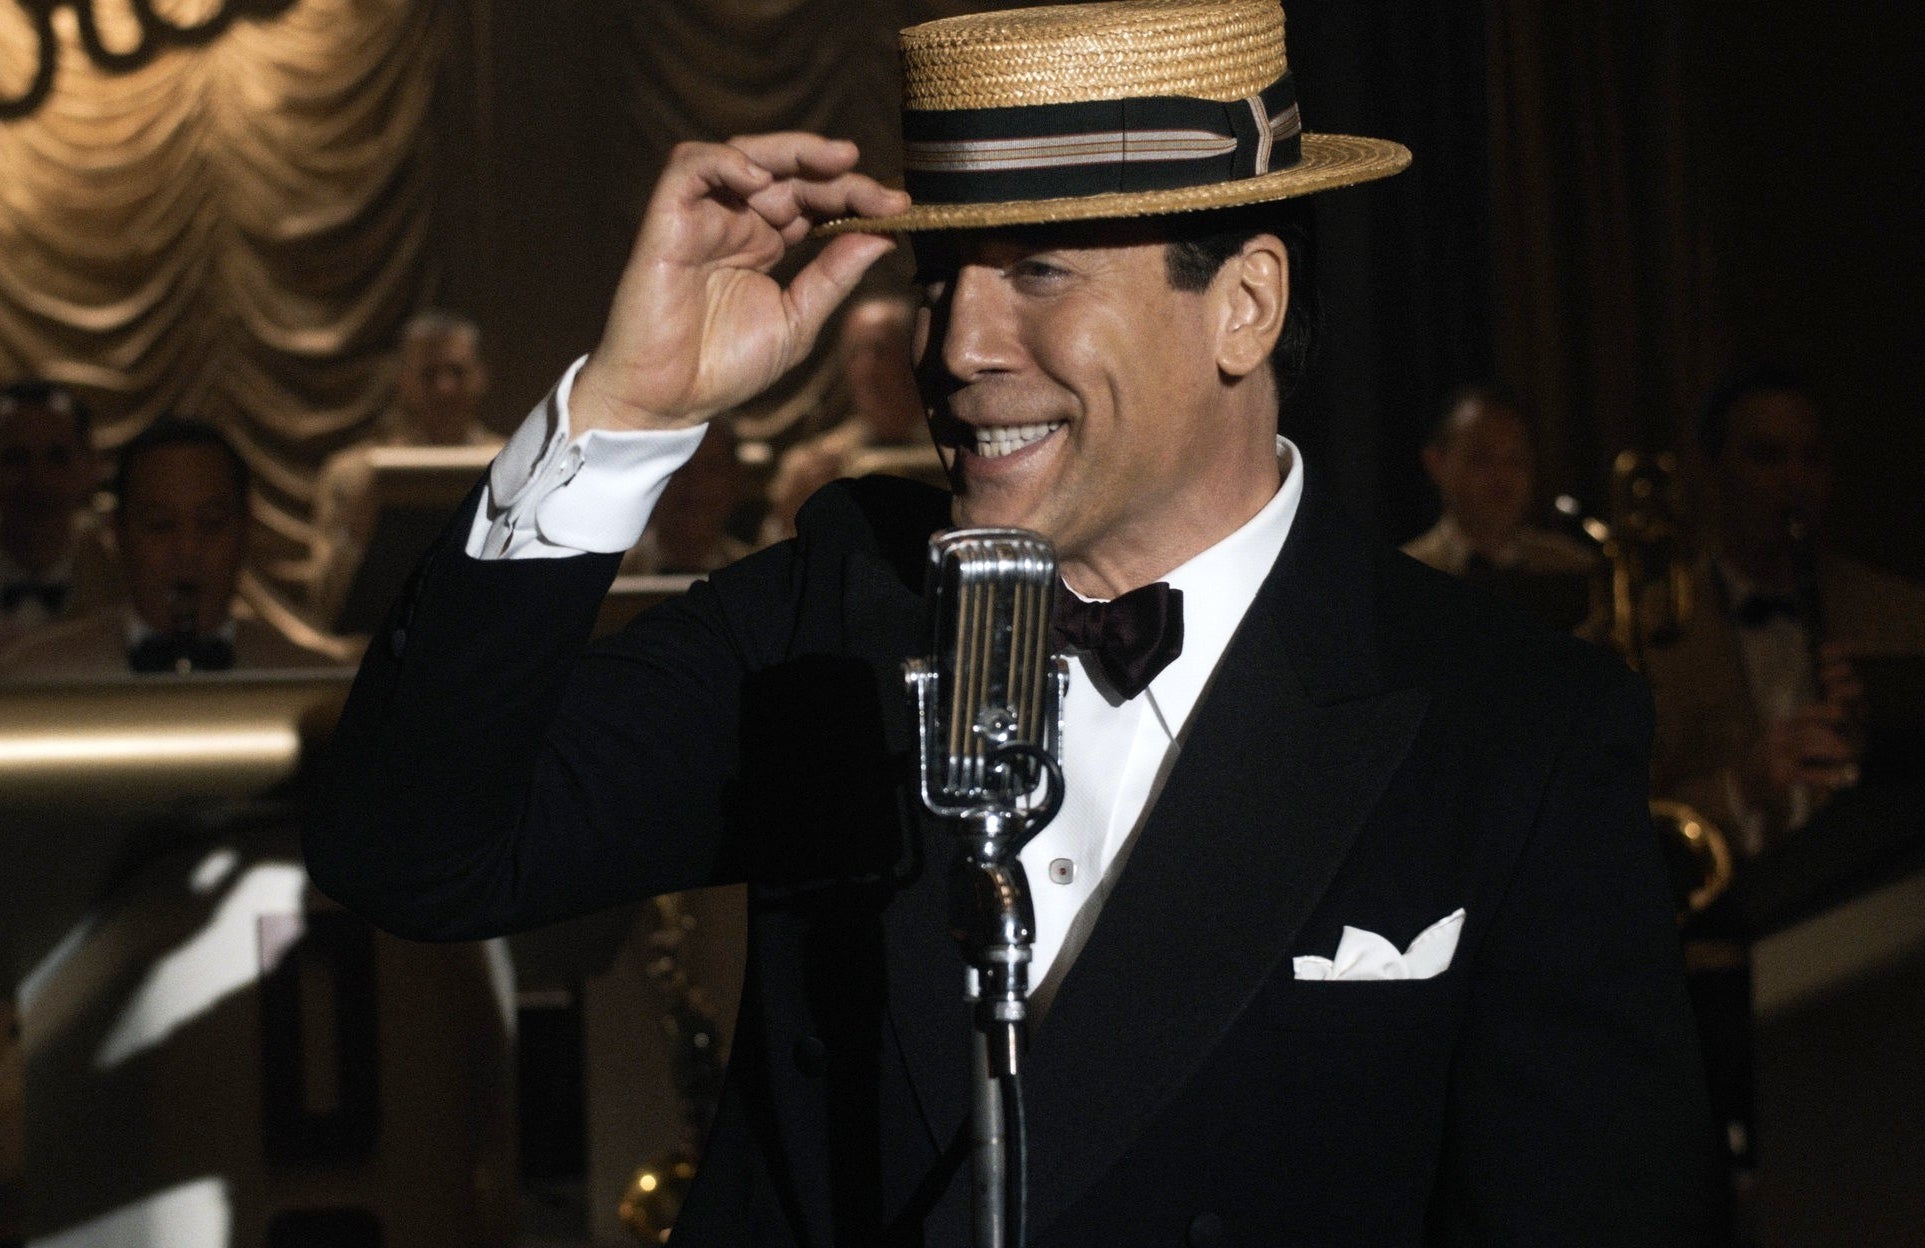 Javier in character as Desi Arnaz in front of a microphone